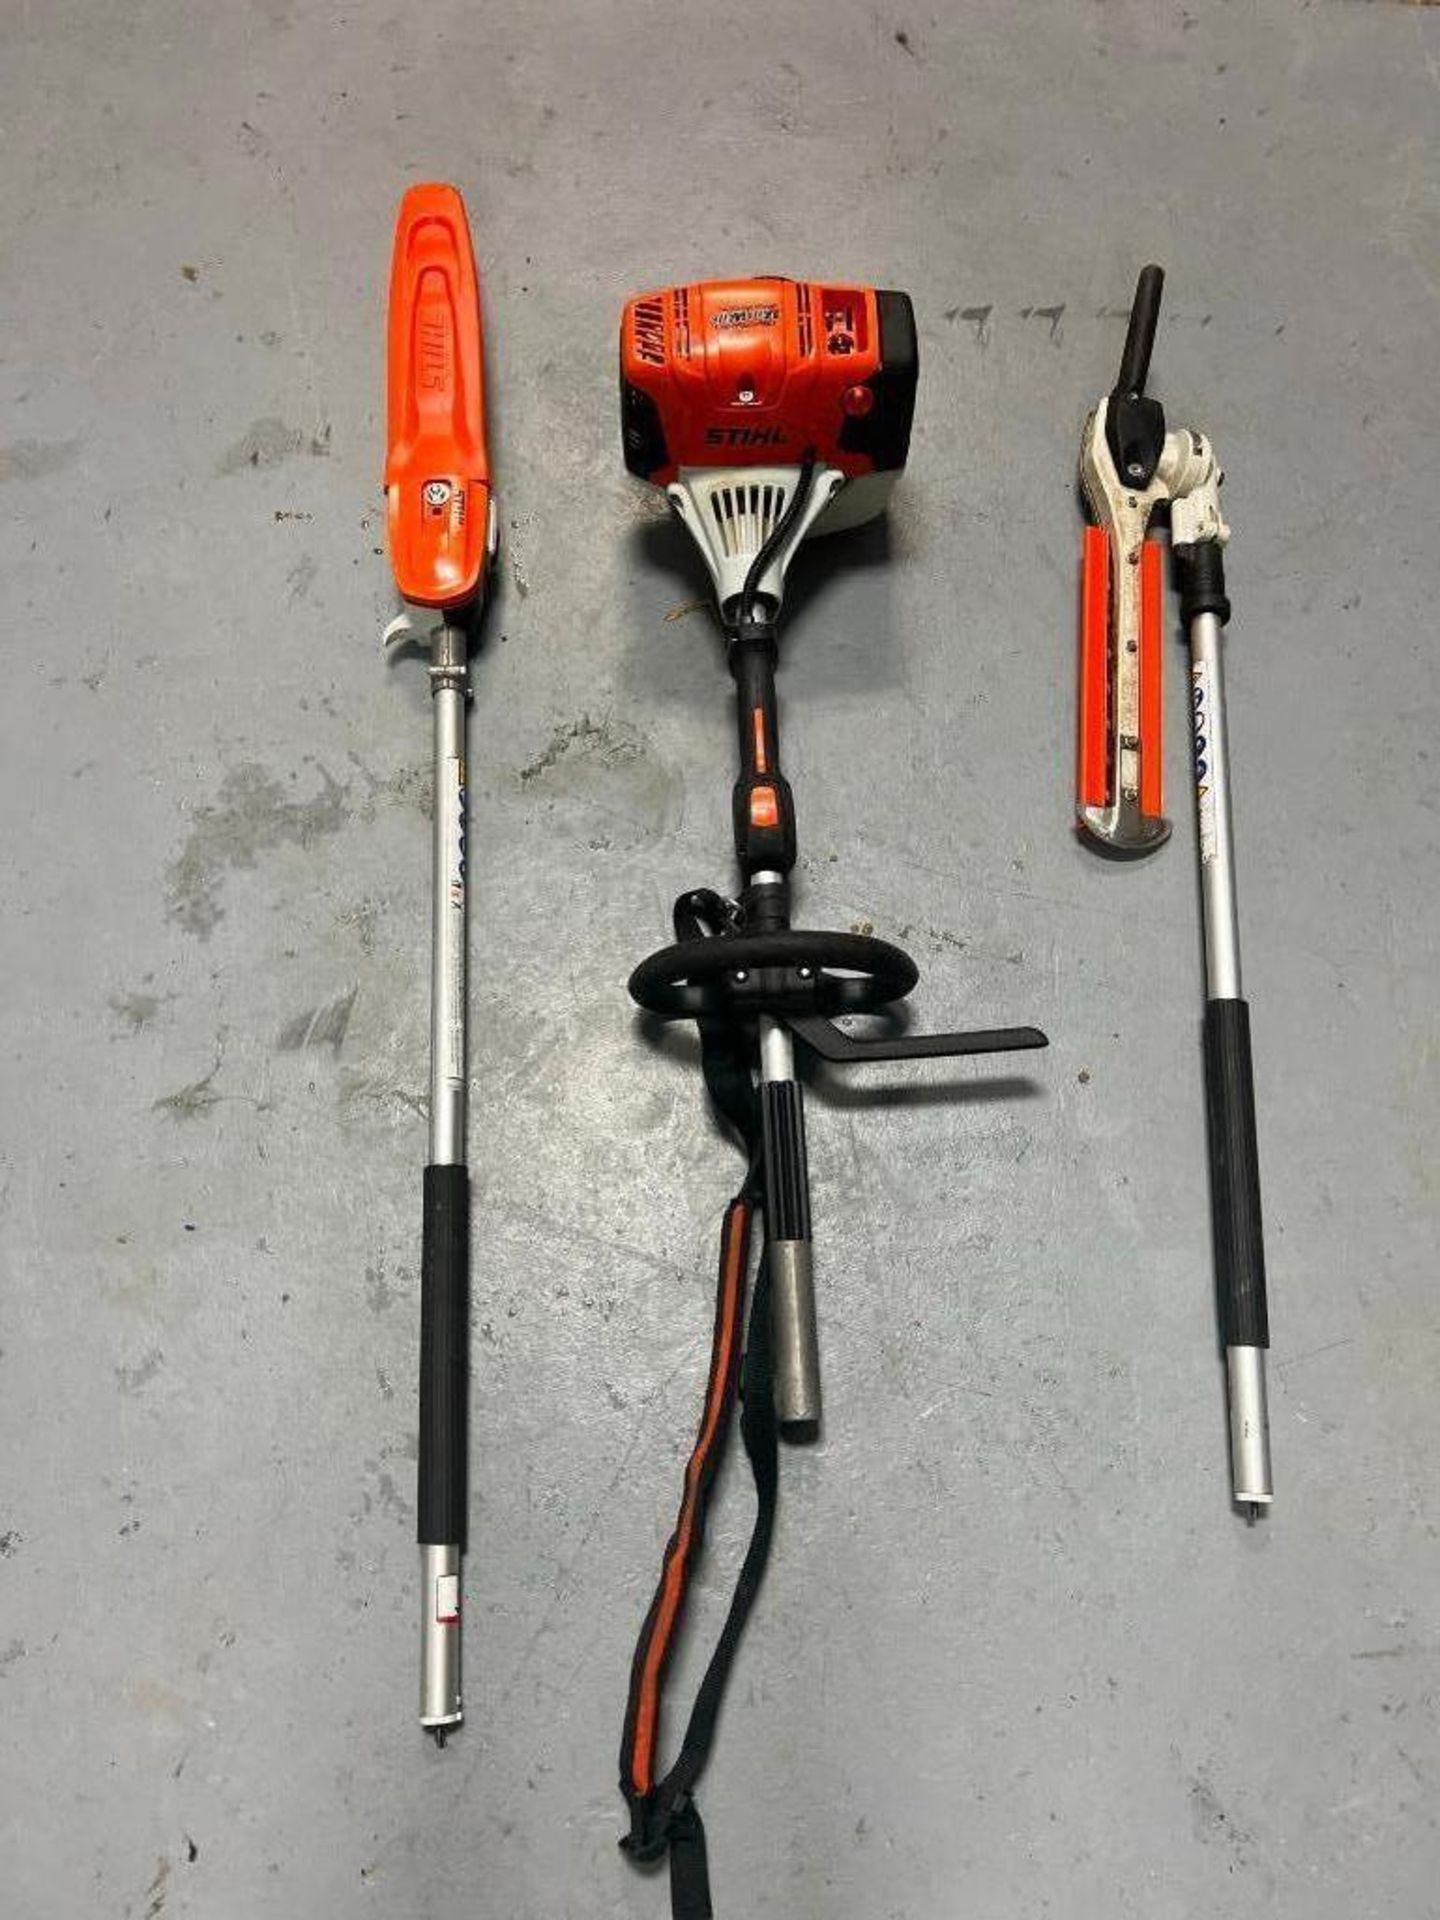 (1) Stihl KM131R with 145 Degree Adjustable Hedge Trimmer Attachment & Long Reach Chainsaw. Located